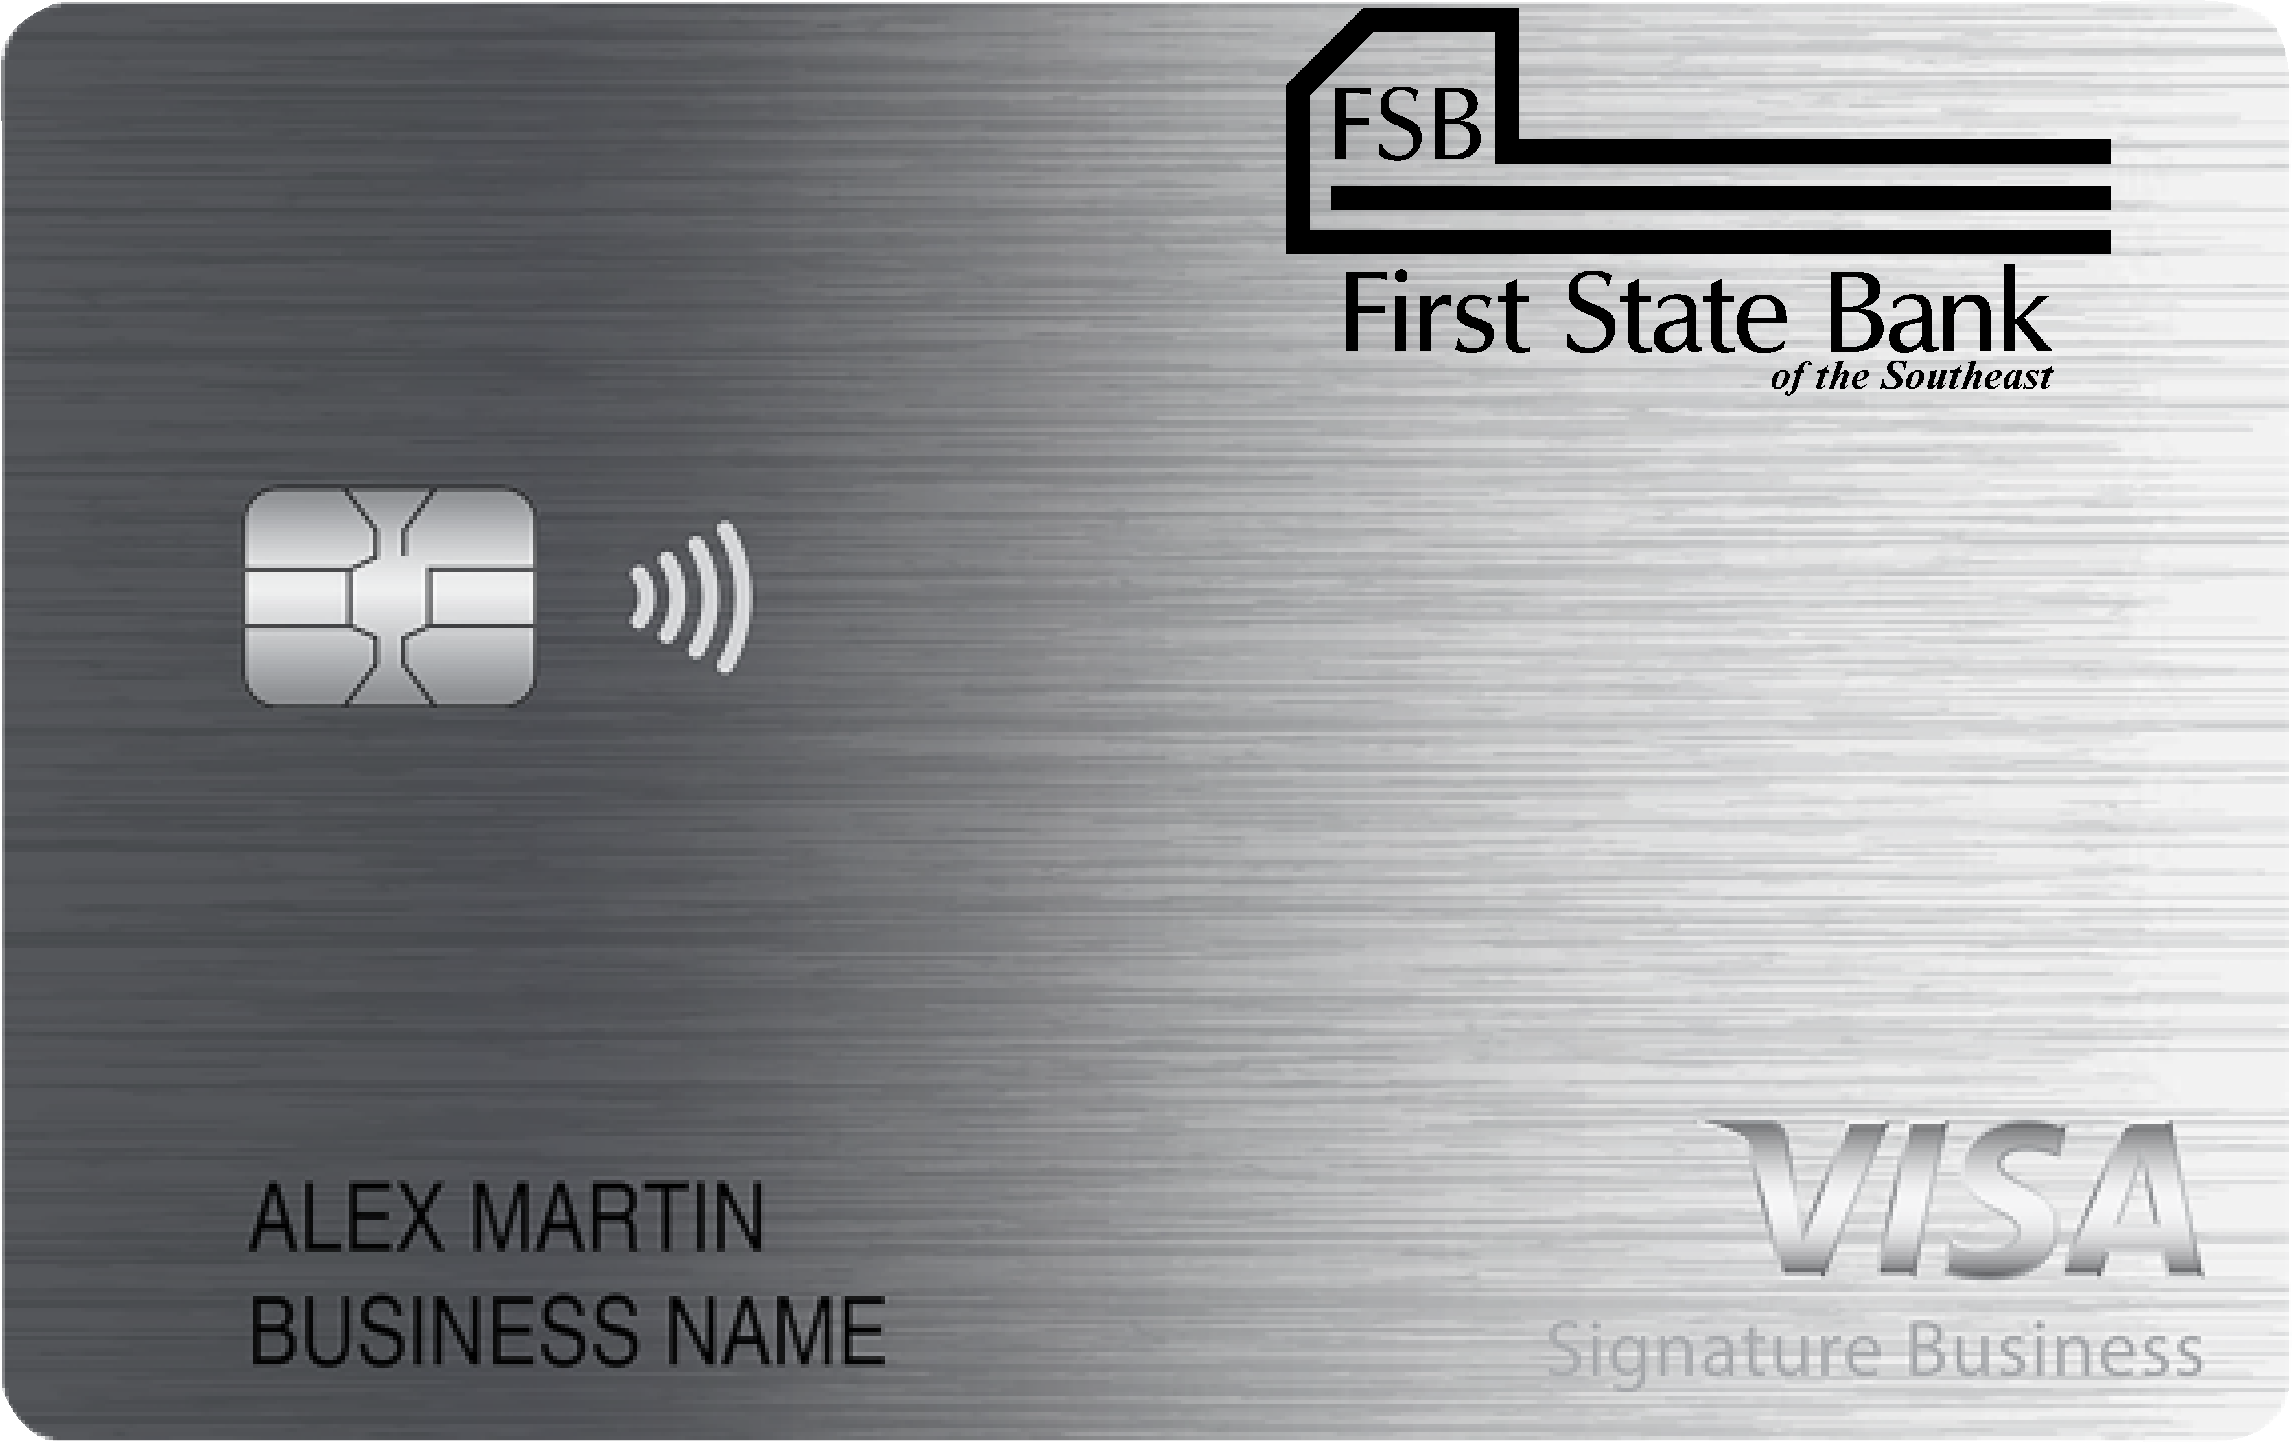 First State Bank of the Southeast Smart Business Rewards Card